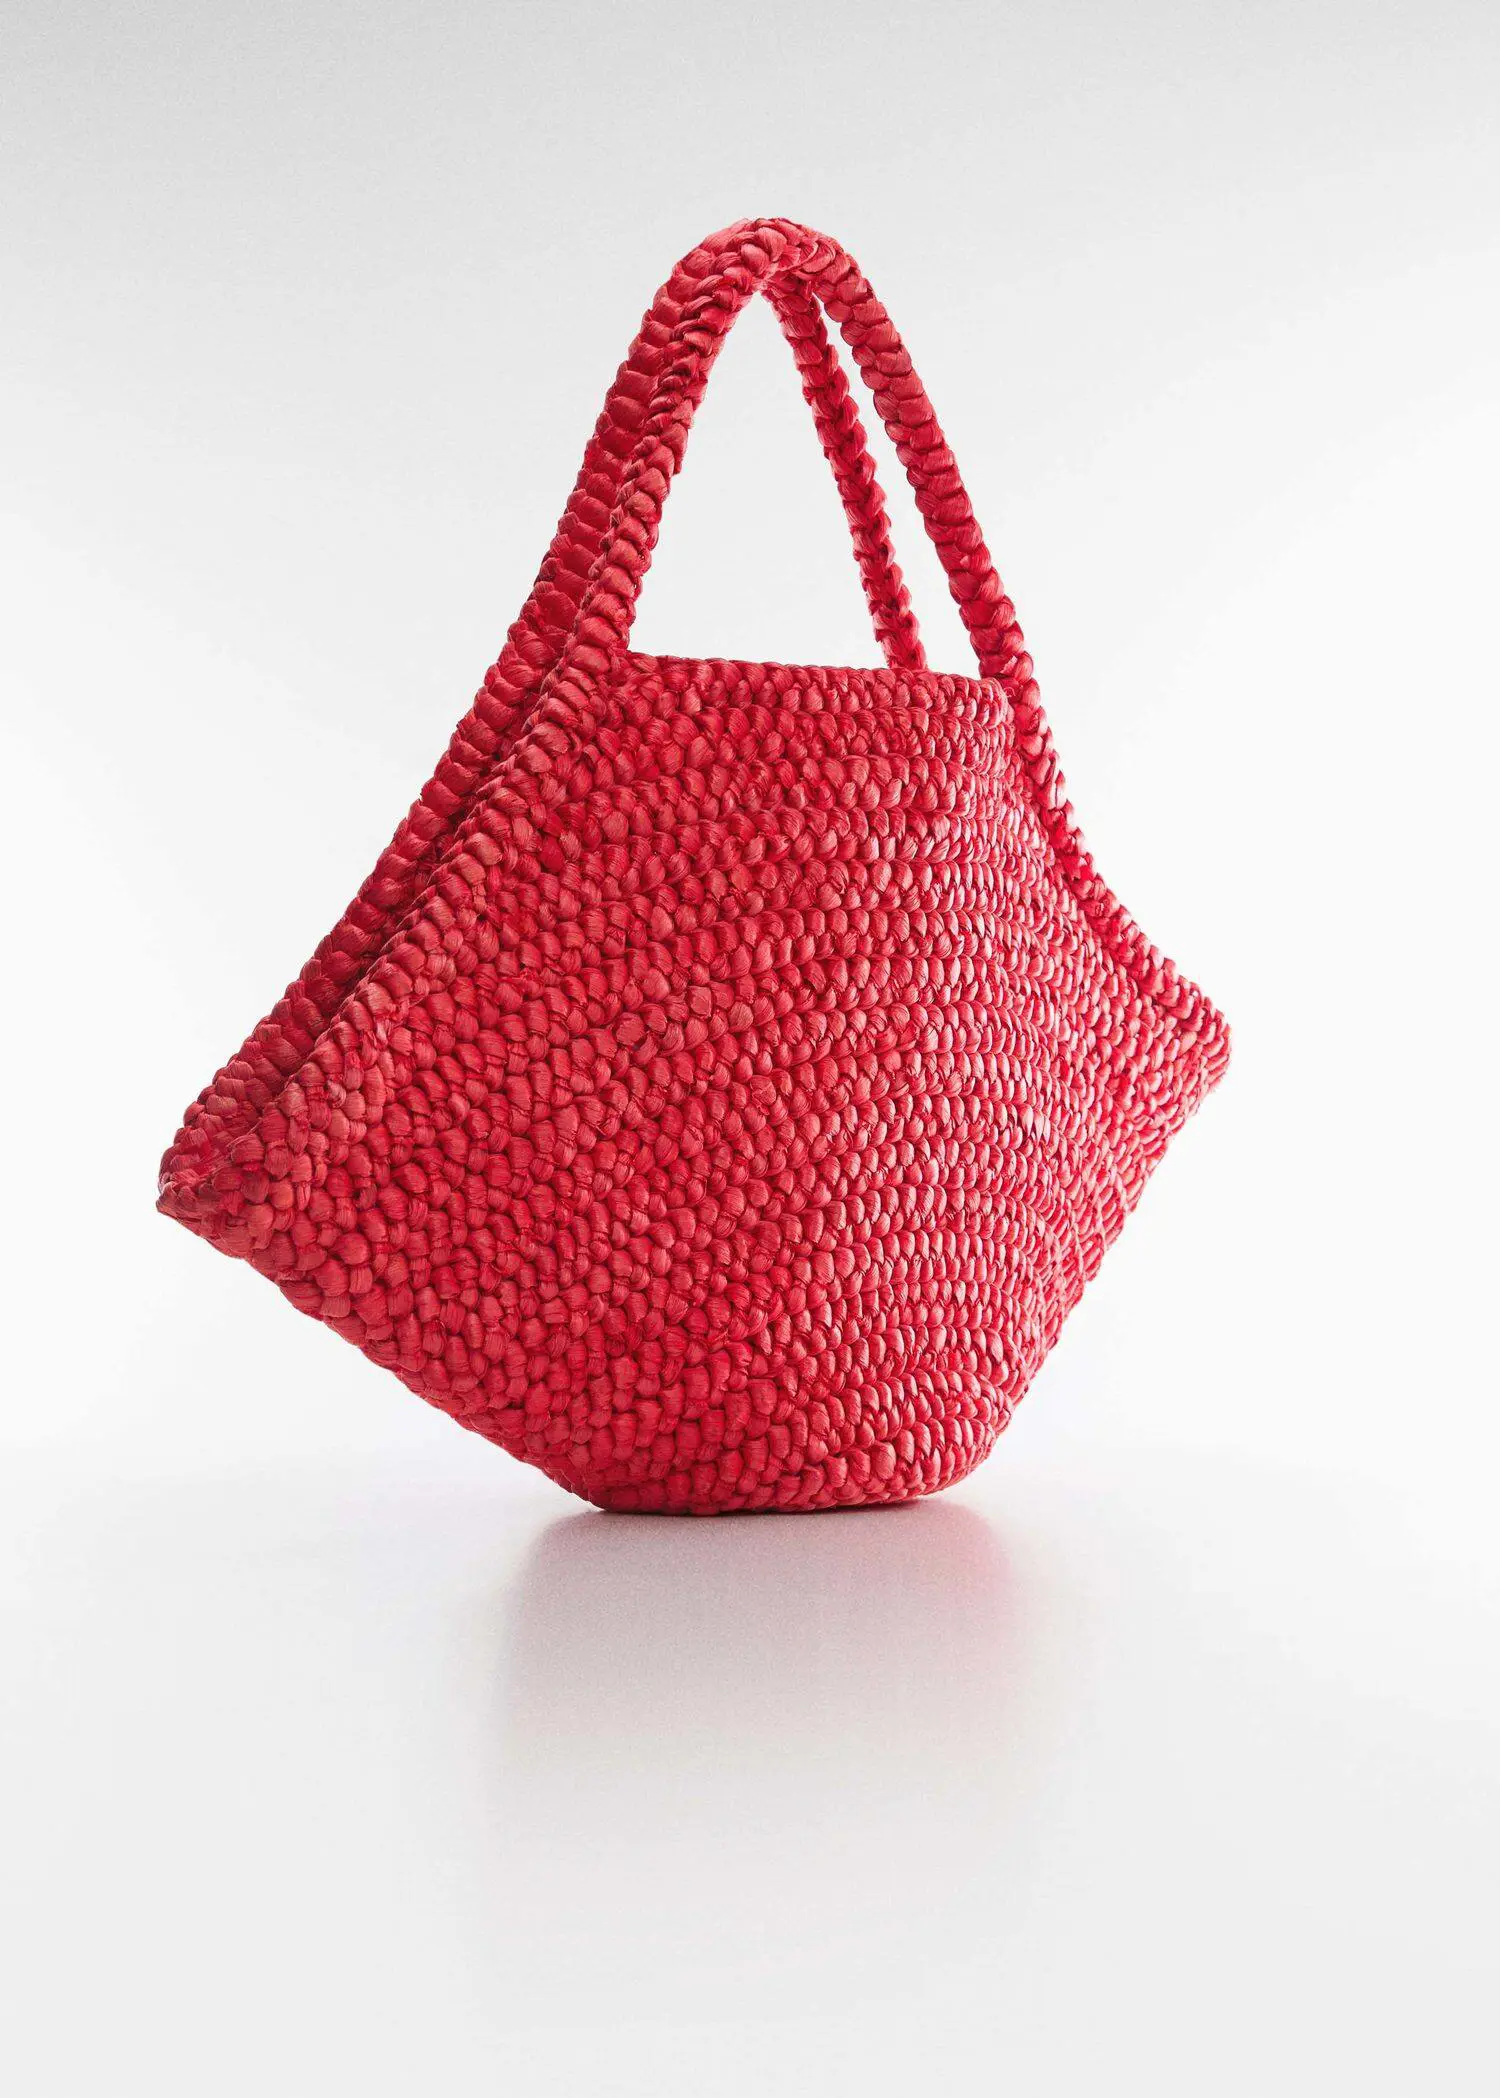 Mango Natural fiber maxi tote bag. a close up of a red bag on a white surface 